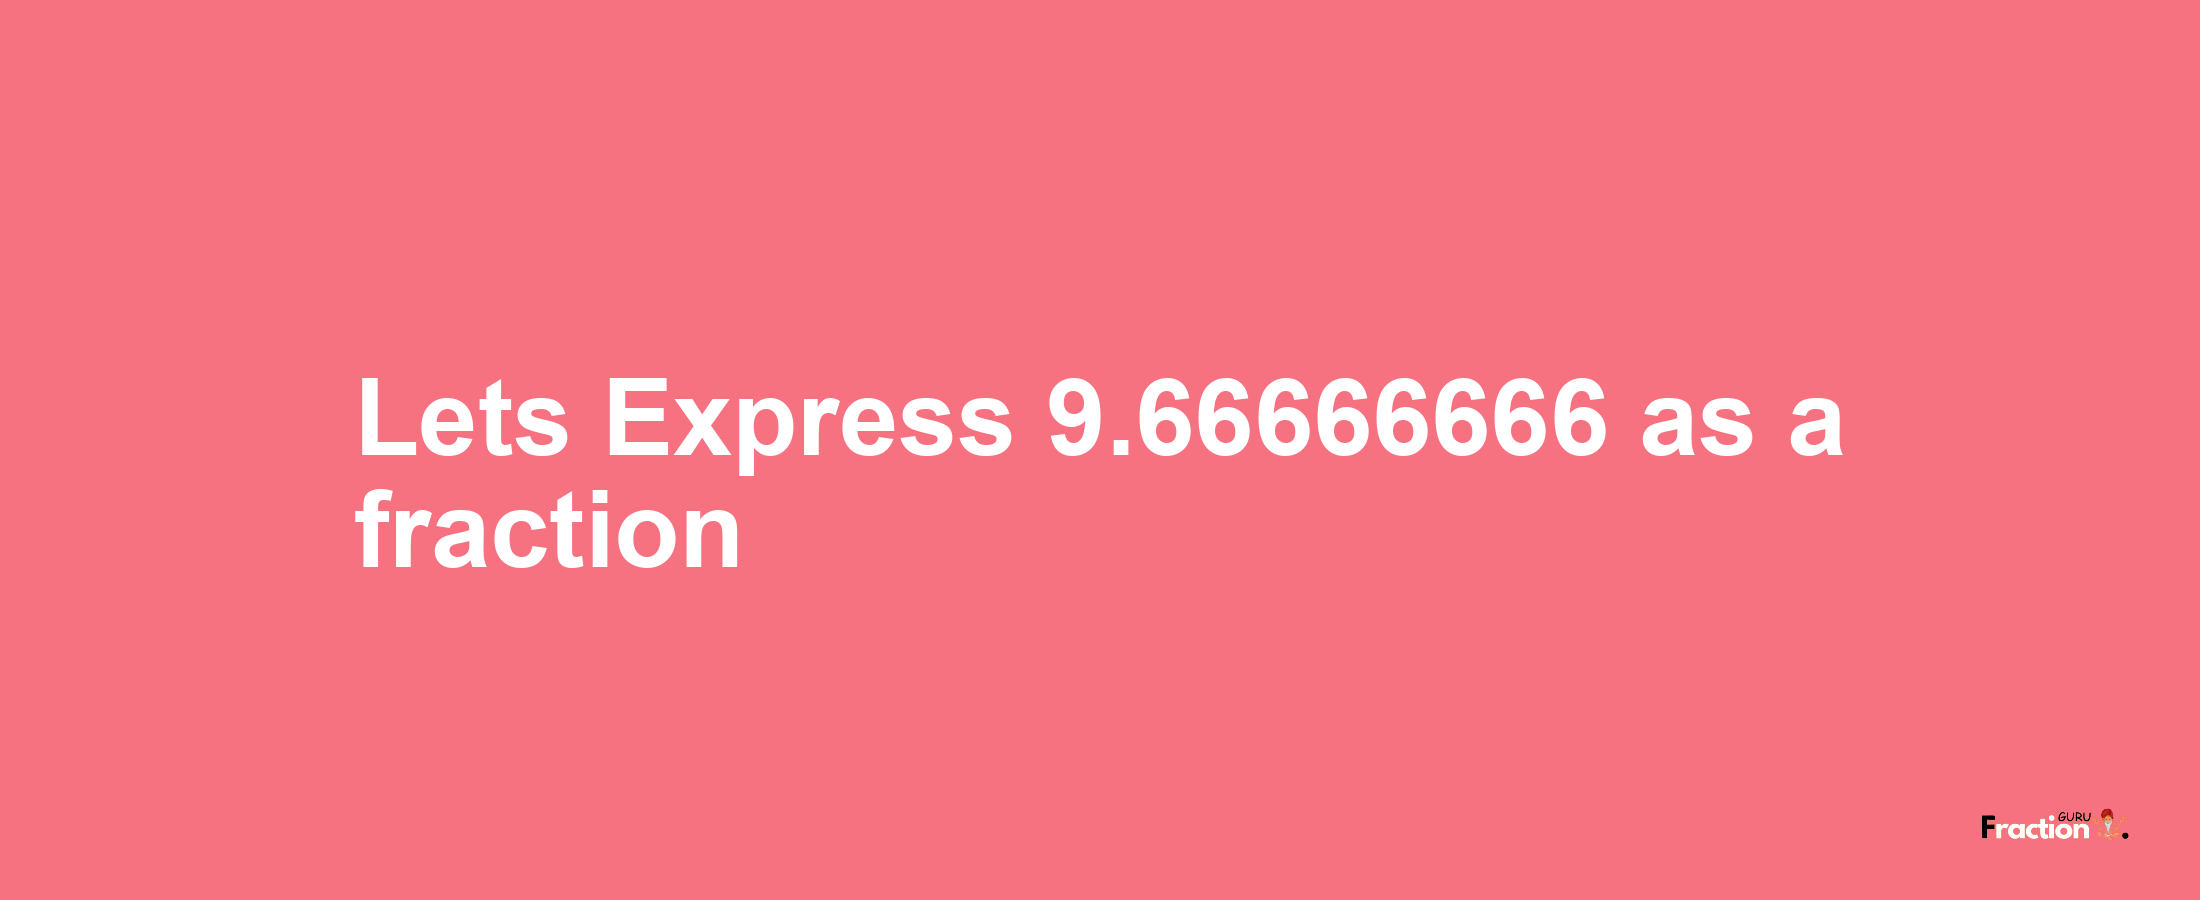 Lets Express 9.66666666 as afraction